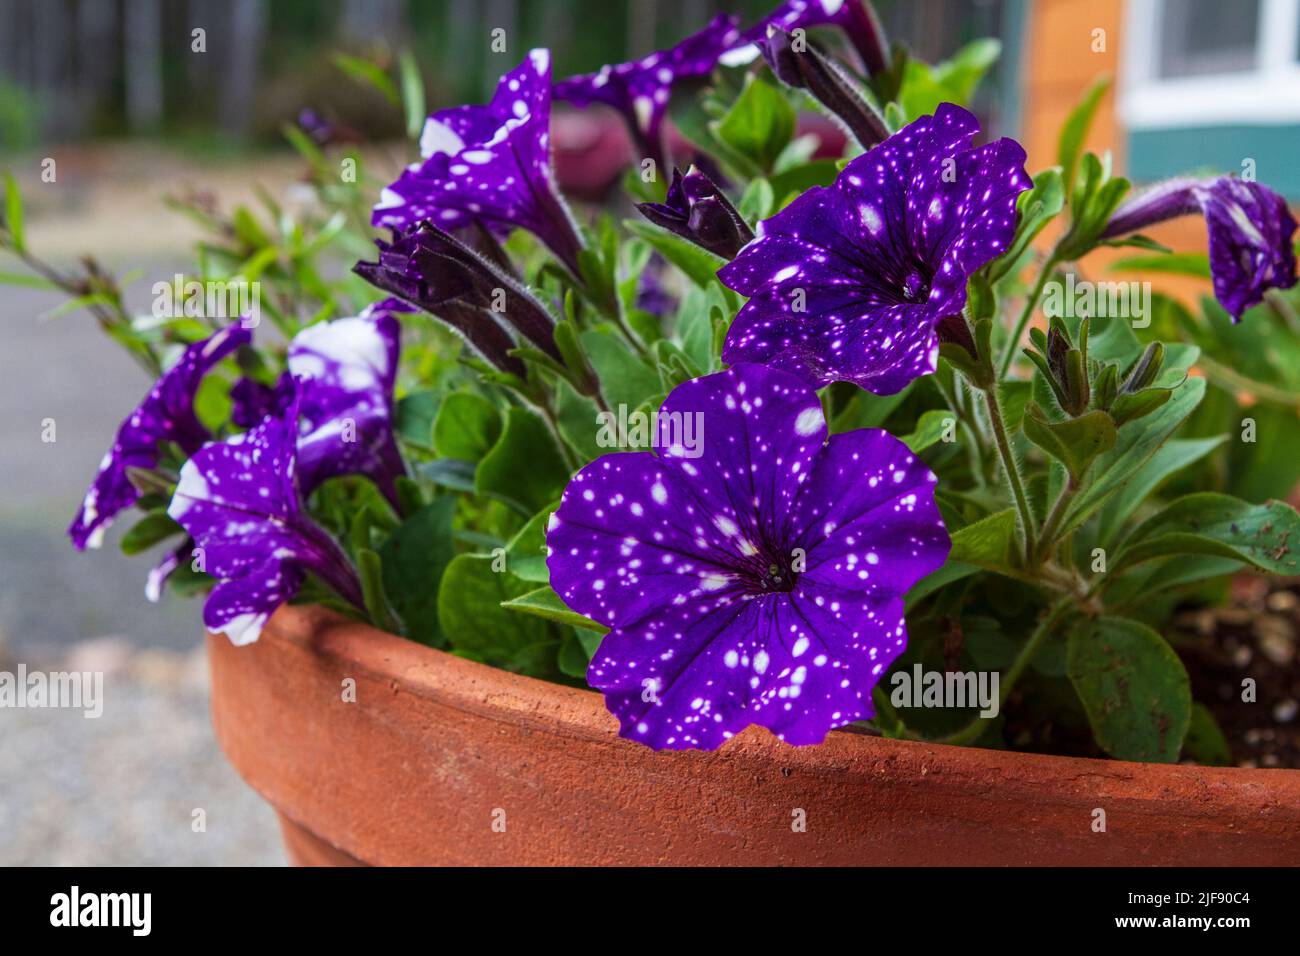 Dark purple and white Petunia Headliner Night Sky (Petunia x hybrida) flowers blooming in a clay pot outdoors in a home garden. Stock Photo